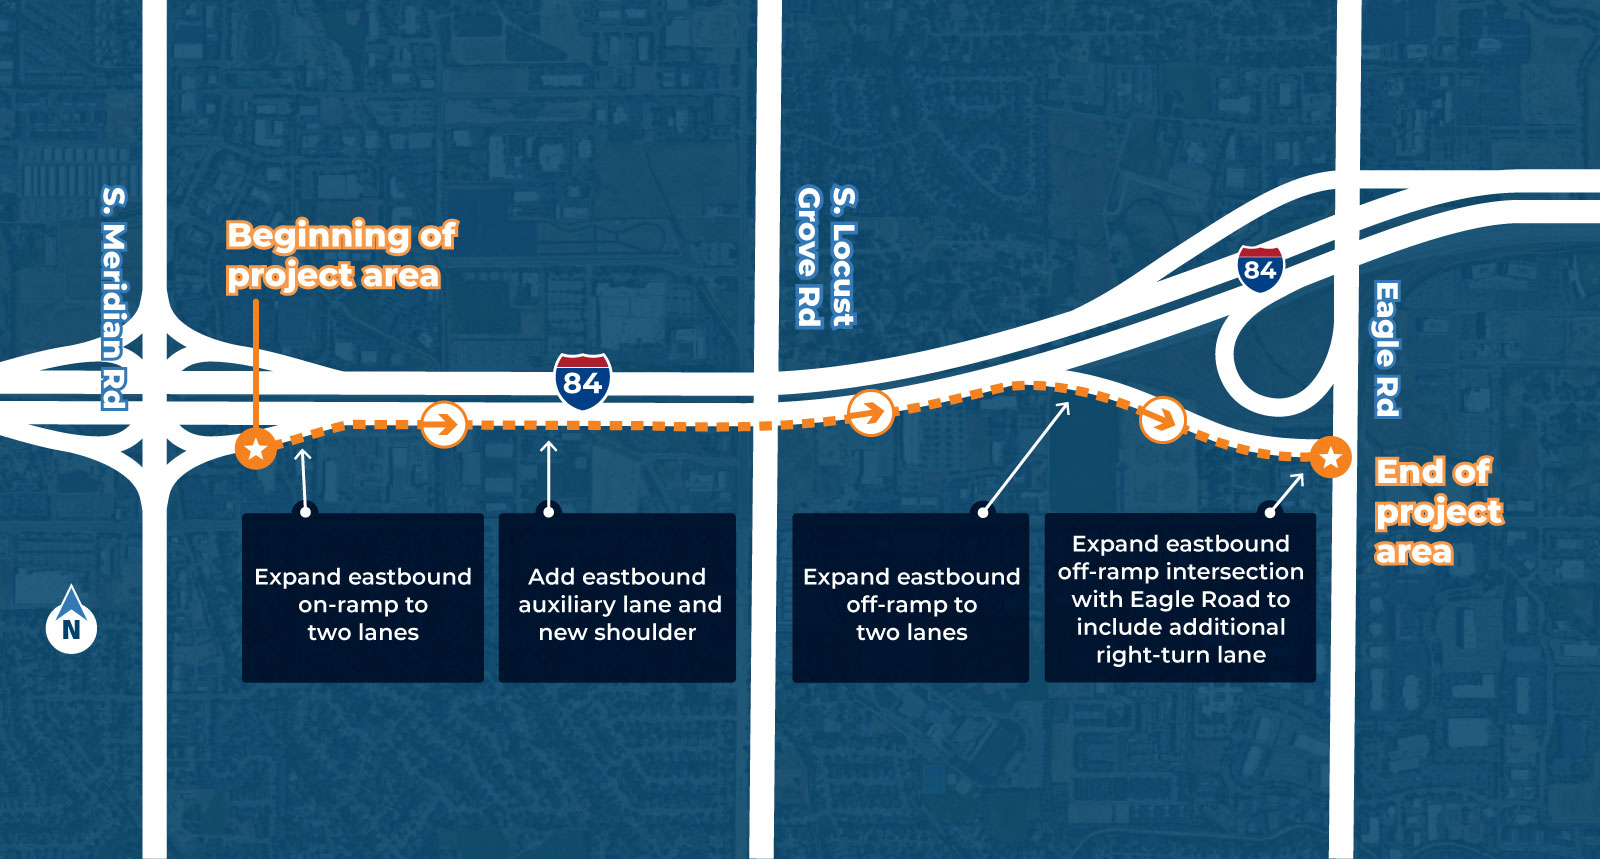 Project area map with highlight of eastbound lanes. Expand eastbound on-ramp to two lanes. Add eastbound auxiliary lane and new shoulder. Expand eastbound off-ramp to two lanes. Expand eastbound off-ramp intersection with Eagle Road to include additional right-turn lane.